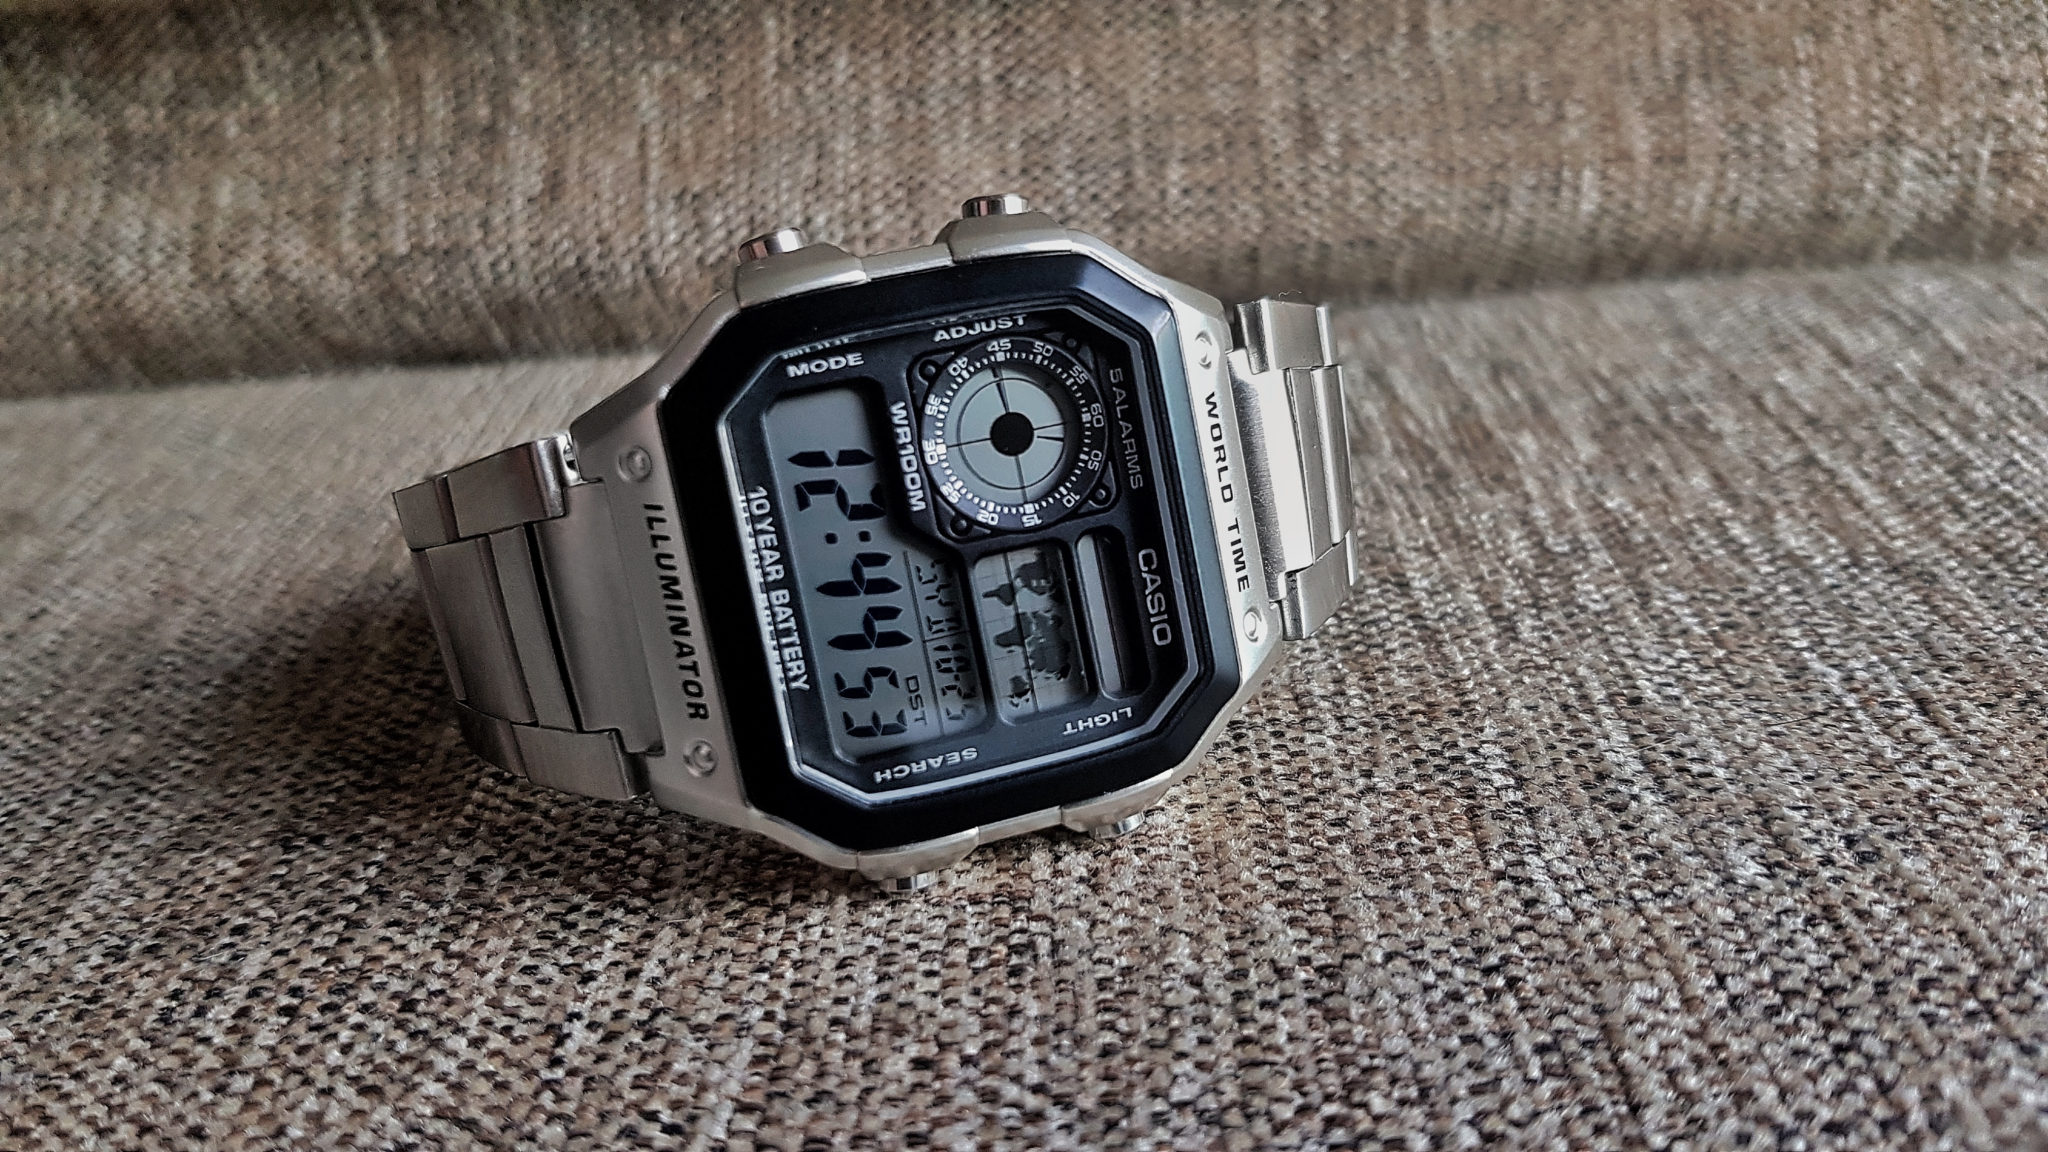 Owner Review: World AKA Casio Royal Review